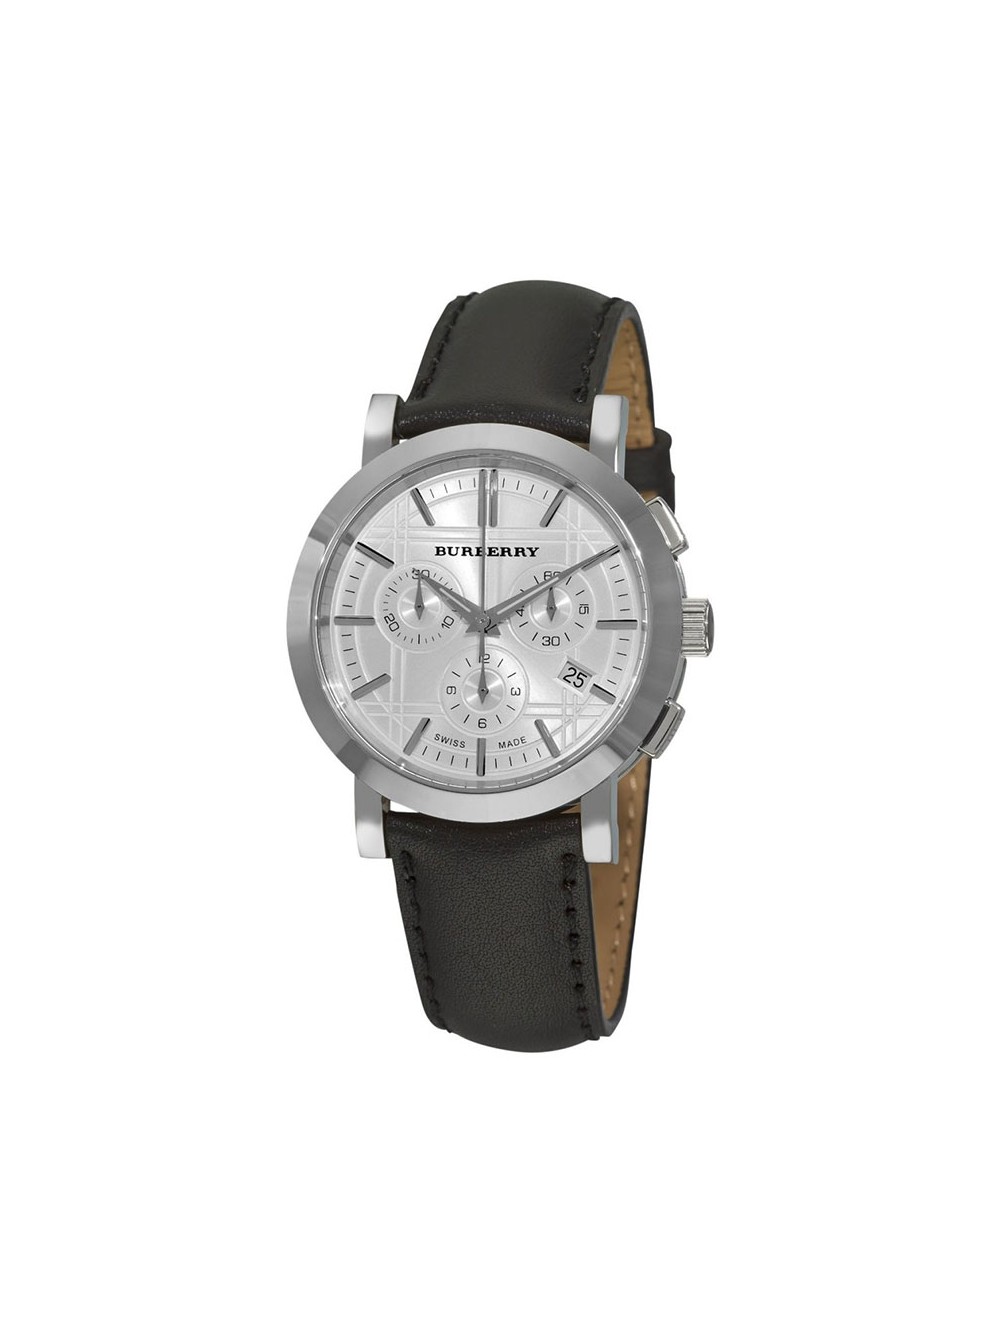 burberry men's leather watches